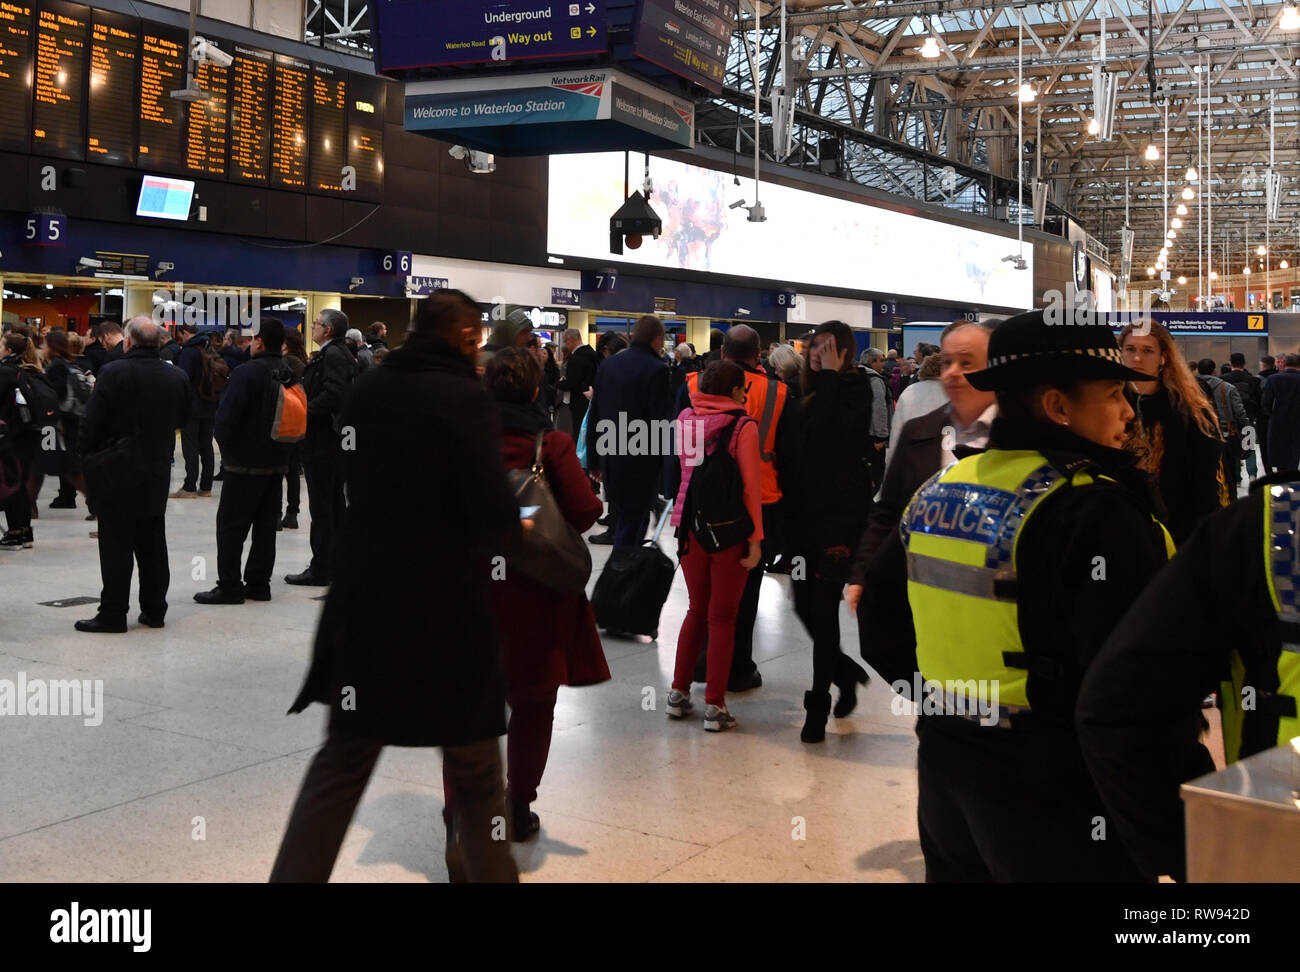 British transport Police Officers on the concourse of Waterloo Railway Station, London, after three small improvised explosive devices were found at buildings at Heathrow Airport, London City Airport and Waterloo in what the Metropolitan Police Counter Terrorism Command said was being treated as a 'linked series'. Stock Photo